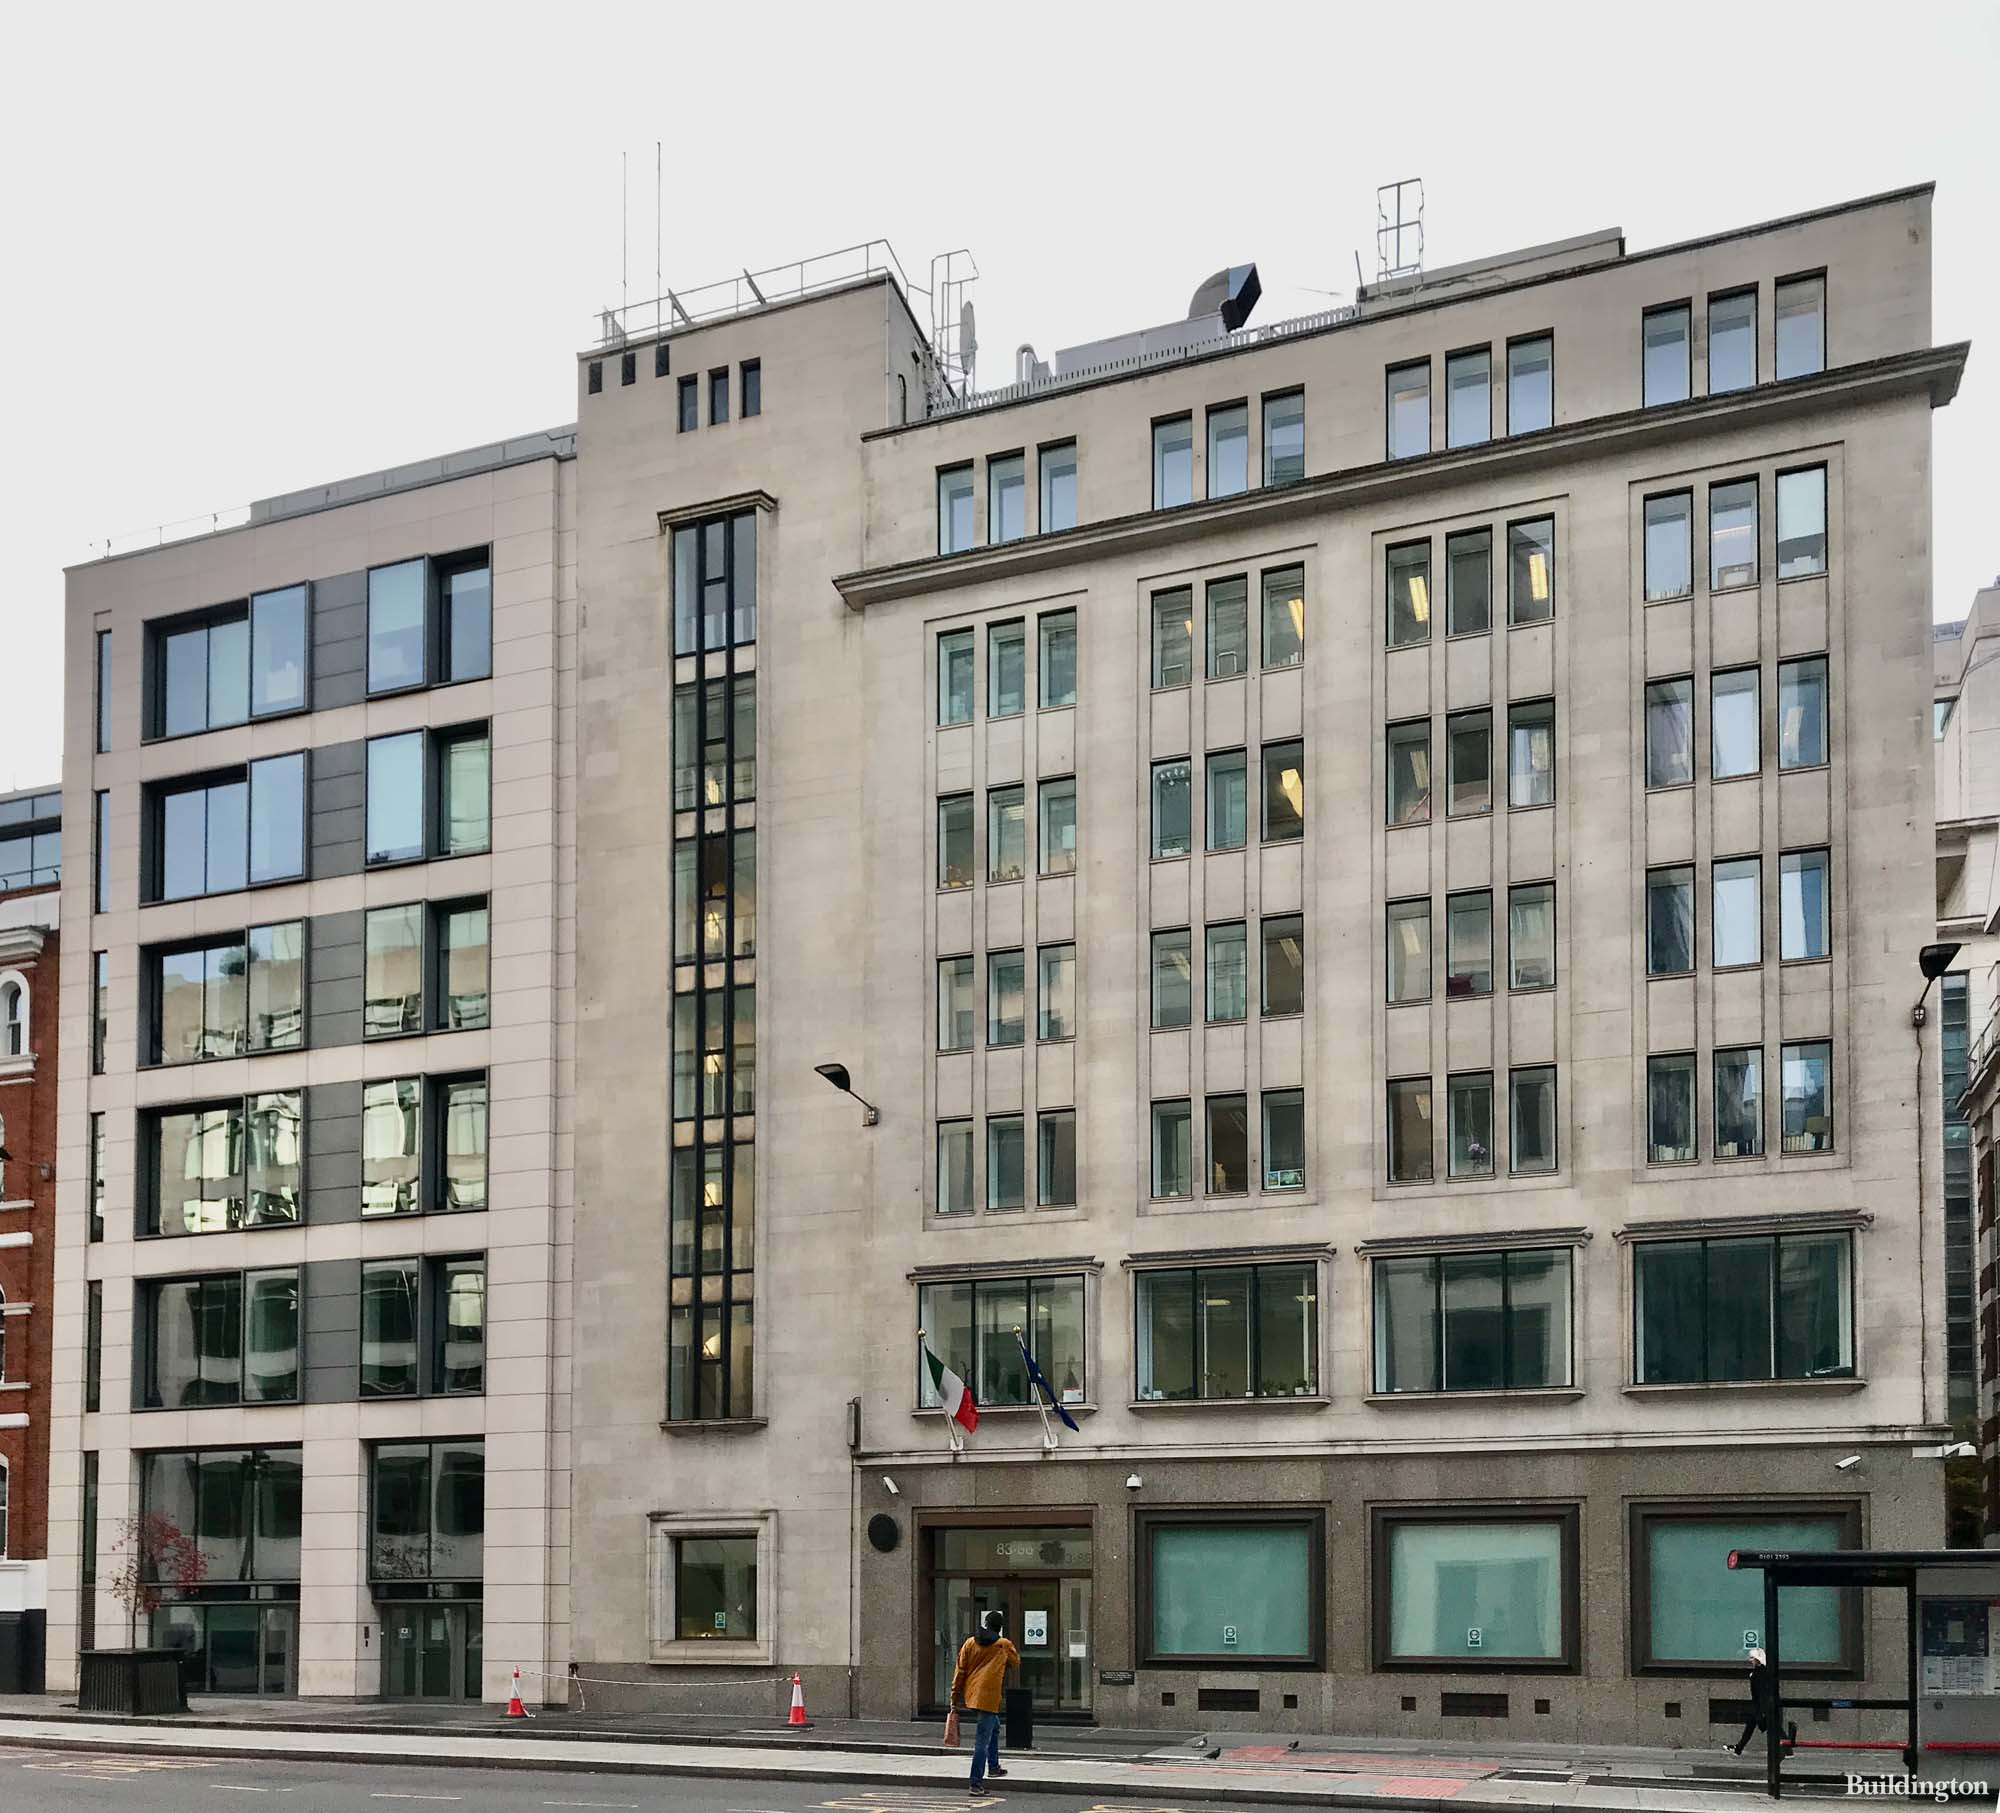 Harp House is a commercial building at 83-86 Farringdon Street, London EC4  